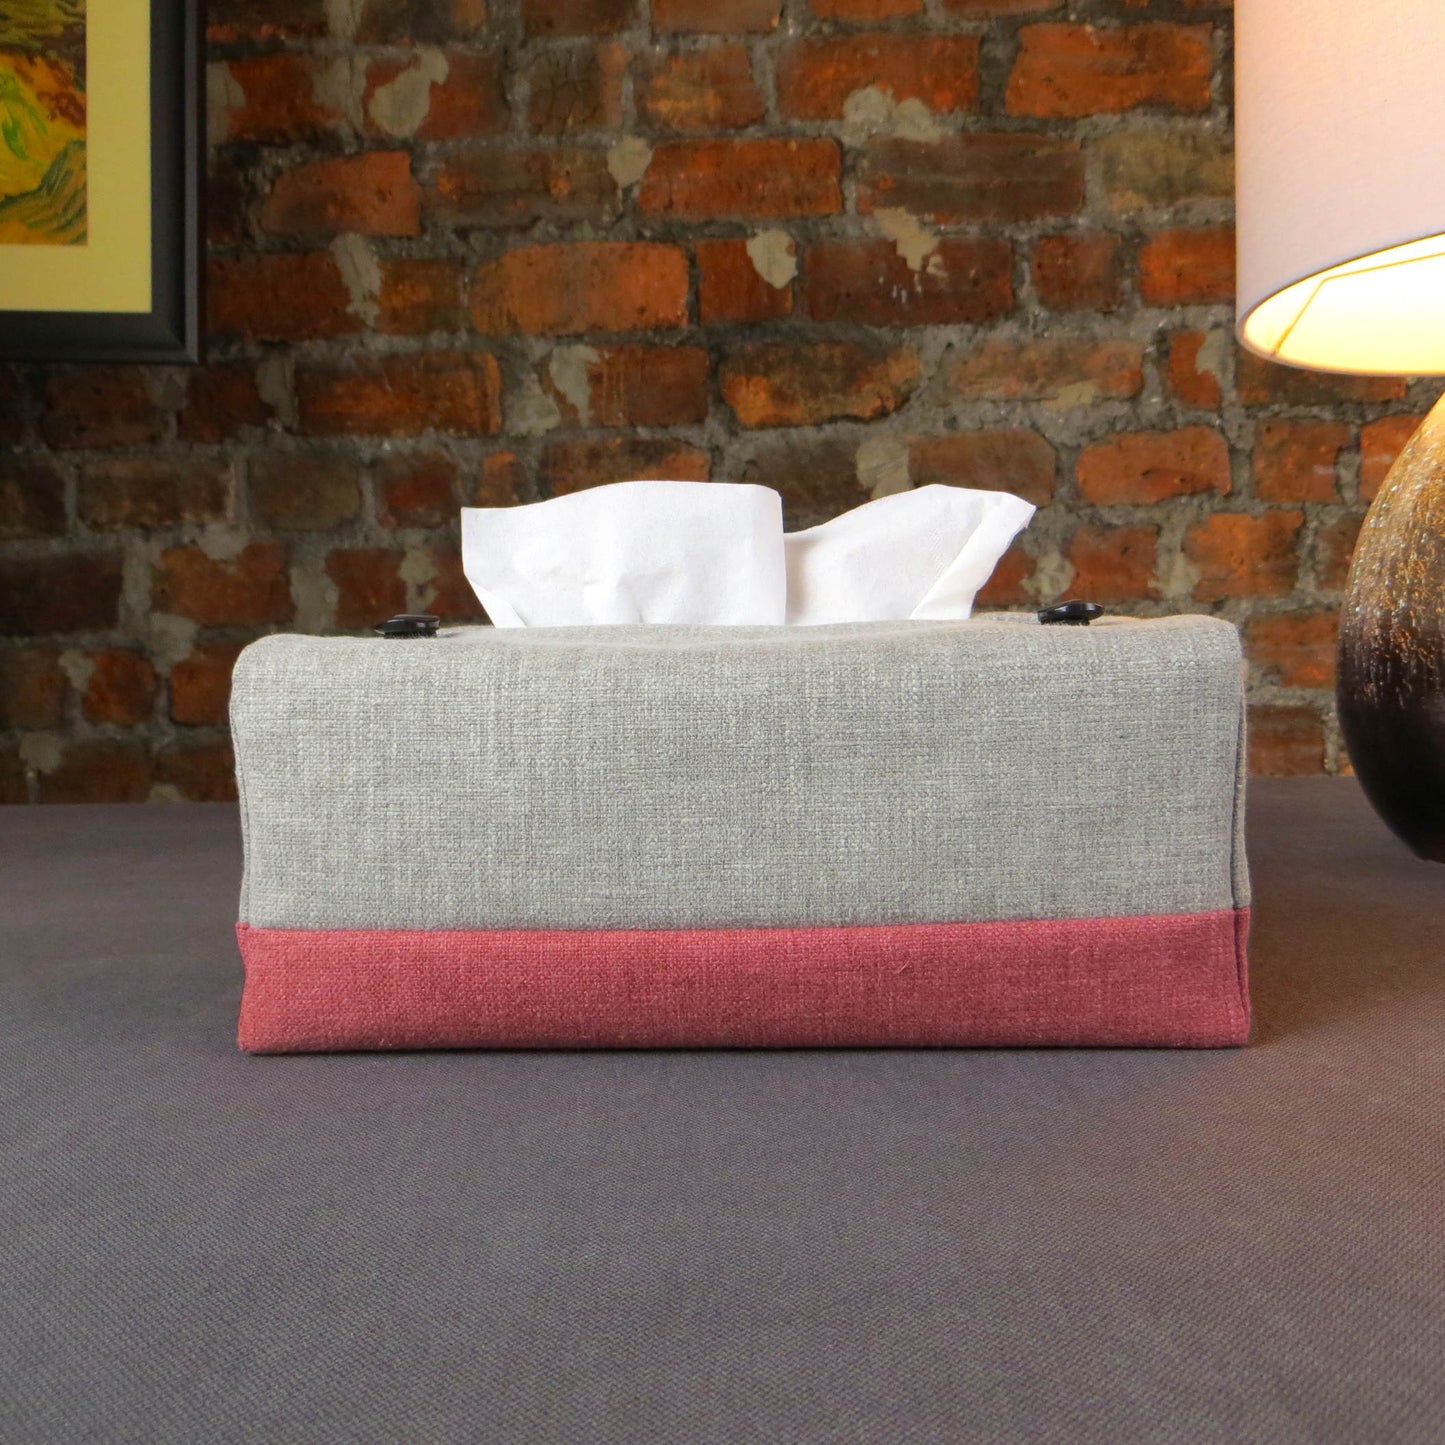 Rectangular Fabric Tissue Box Cover - Two Tone Taupe and Burgundy